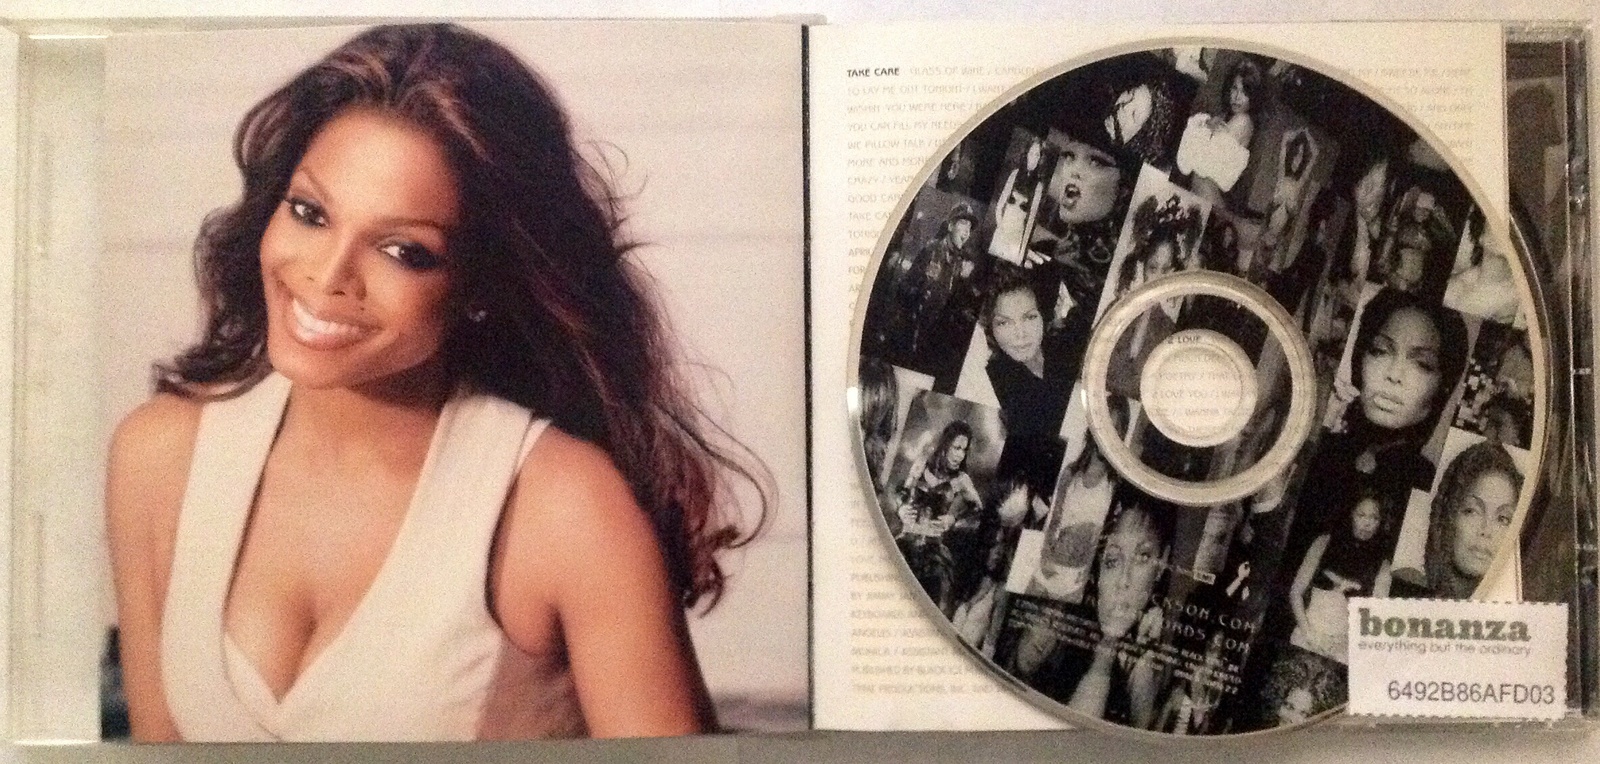 Jackson Janet 20 Years Old Cd Cds 